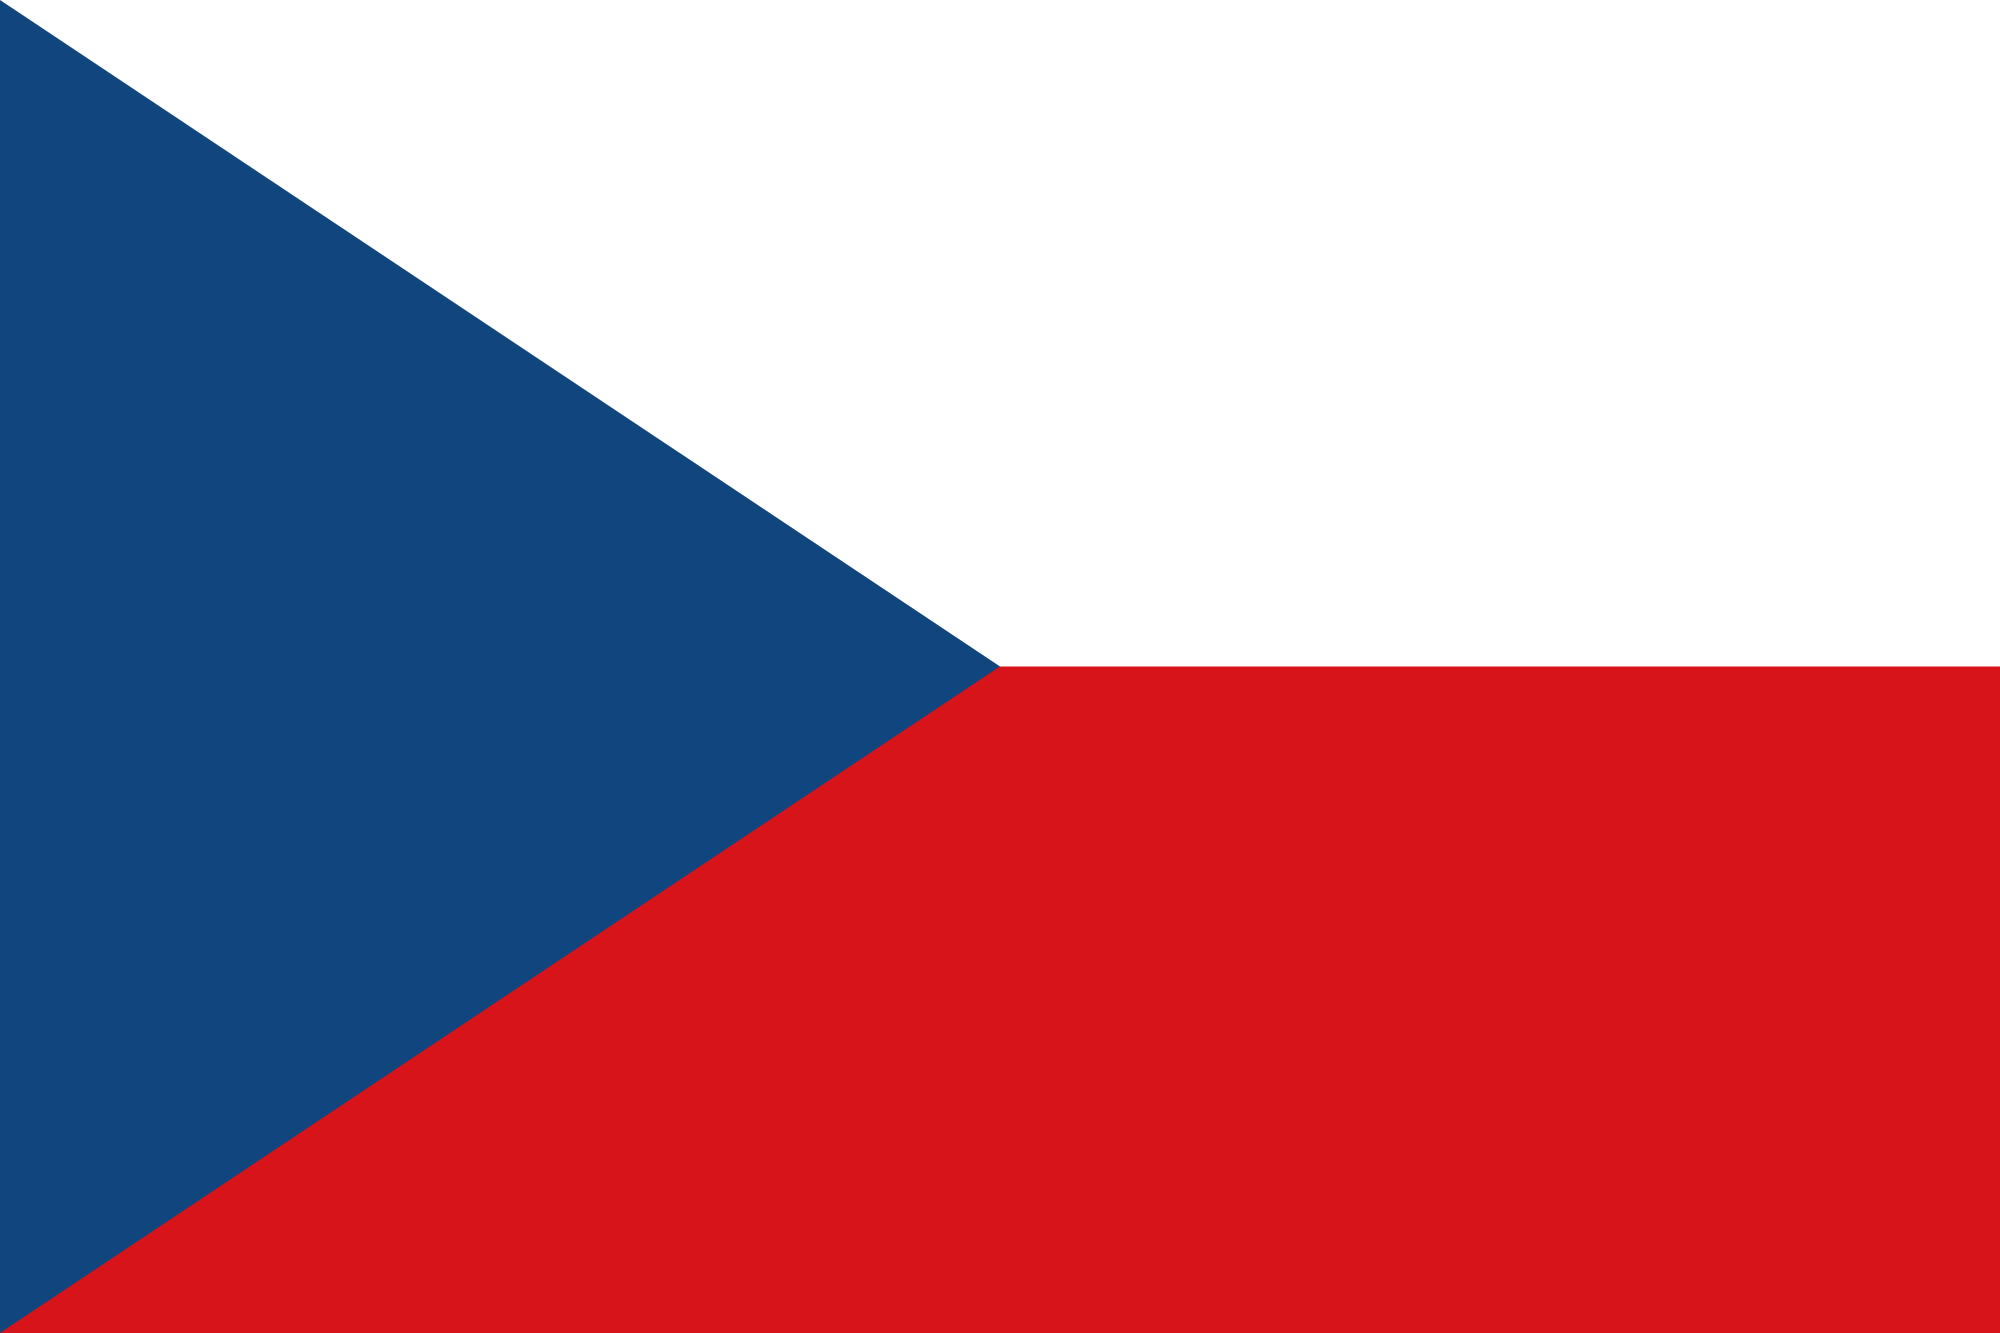 Flag_of_the_Czech_Republic.svg.png, 16kB